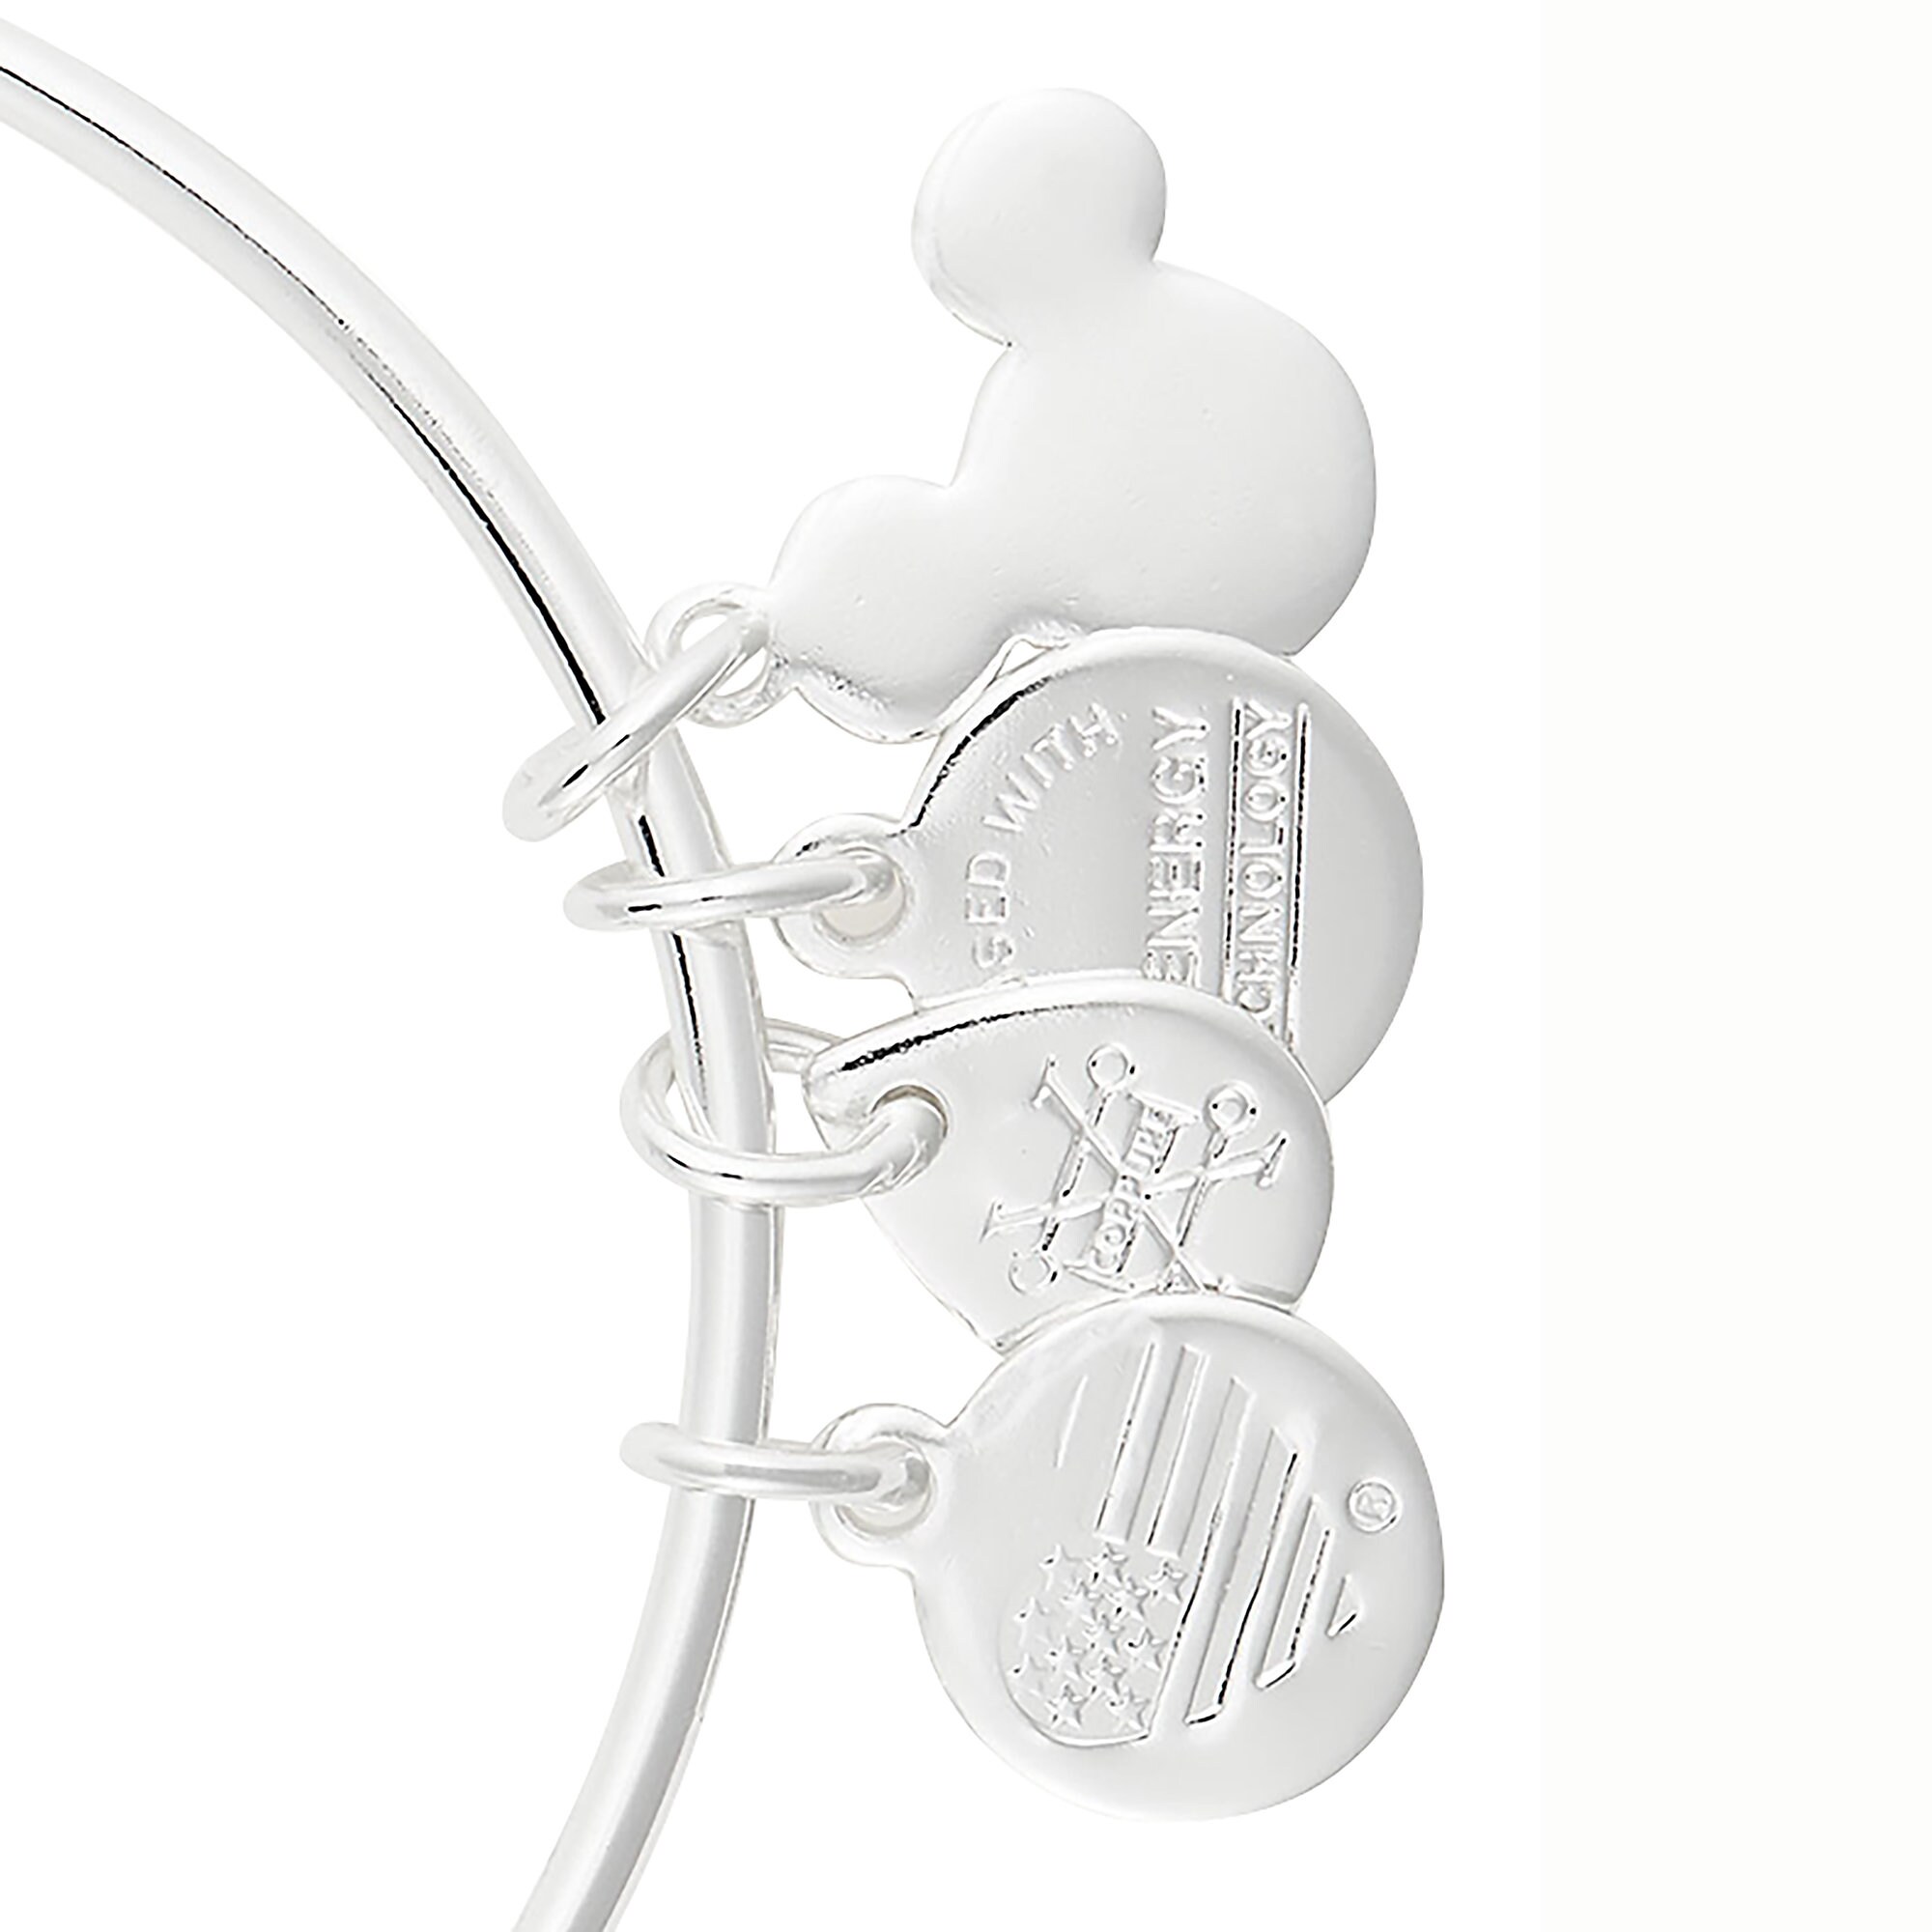 Cinderella ''Have courage and be kind'' Bangle by Alex and Ani